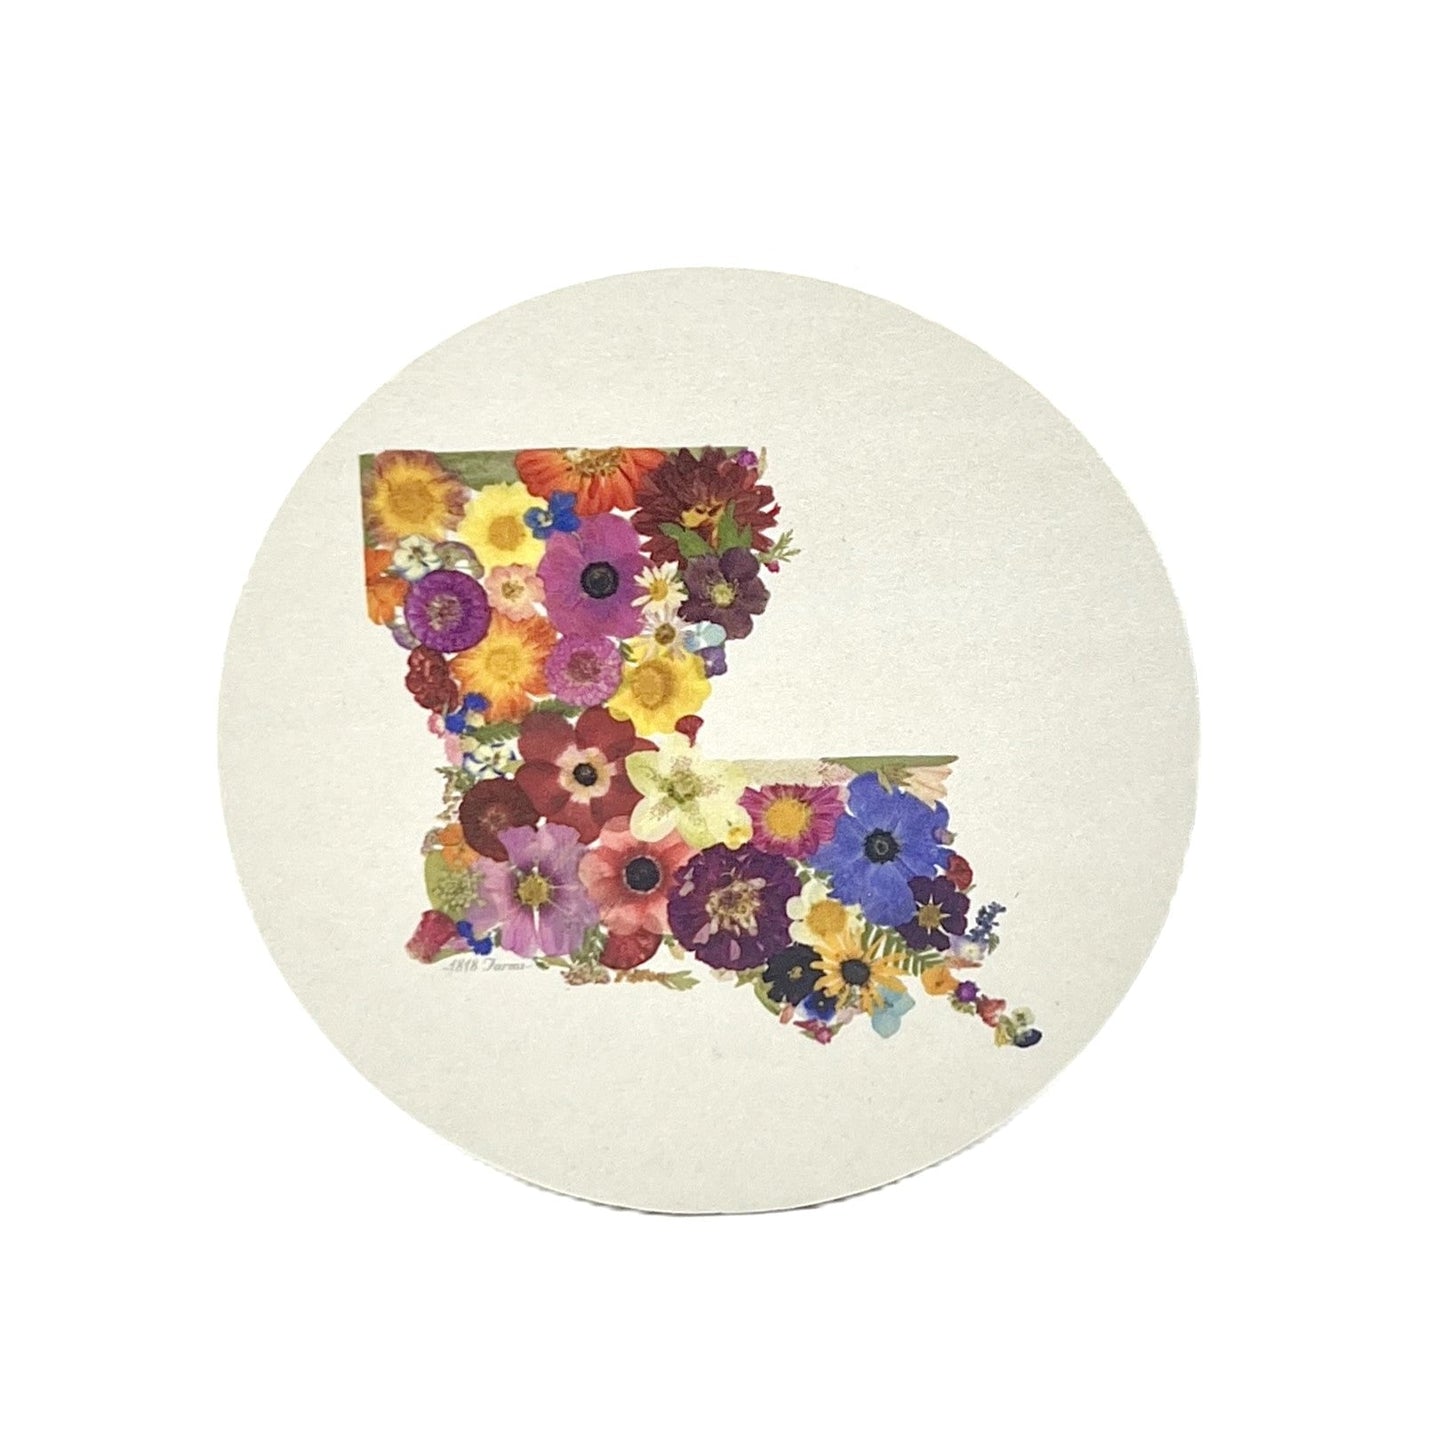 State Themed Drink Coasters (Set of 6)  - "Where I Bloom" Collection Coaster 1818 Farms Louisiana  